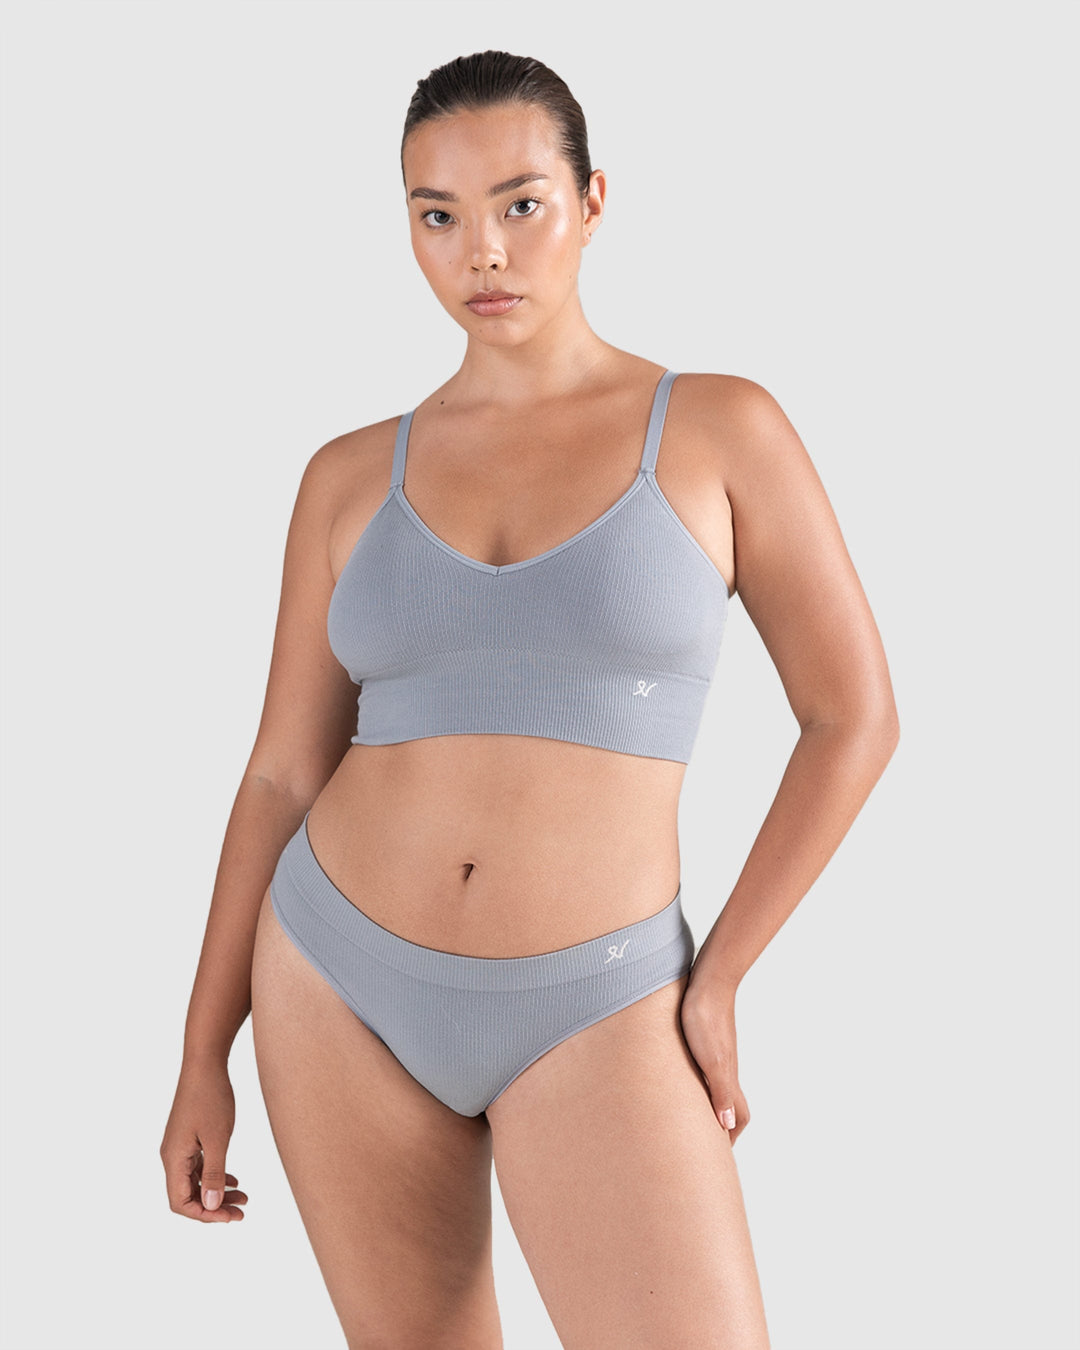 DAILY DEAL FINAL SALE CAGED BRALETTE - SPRING BLUE